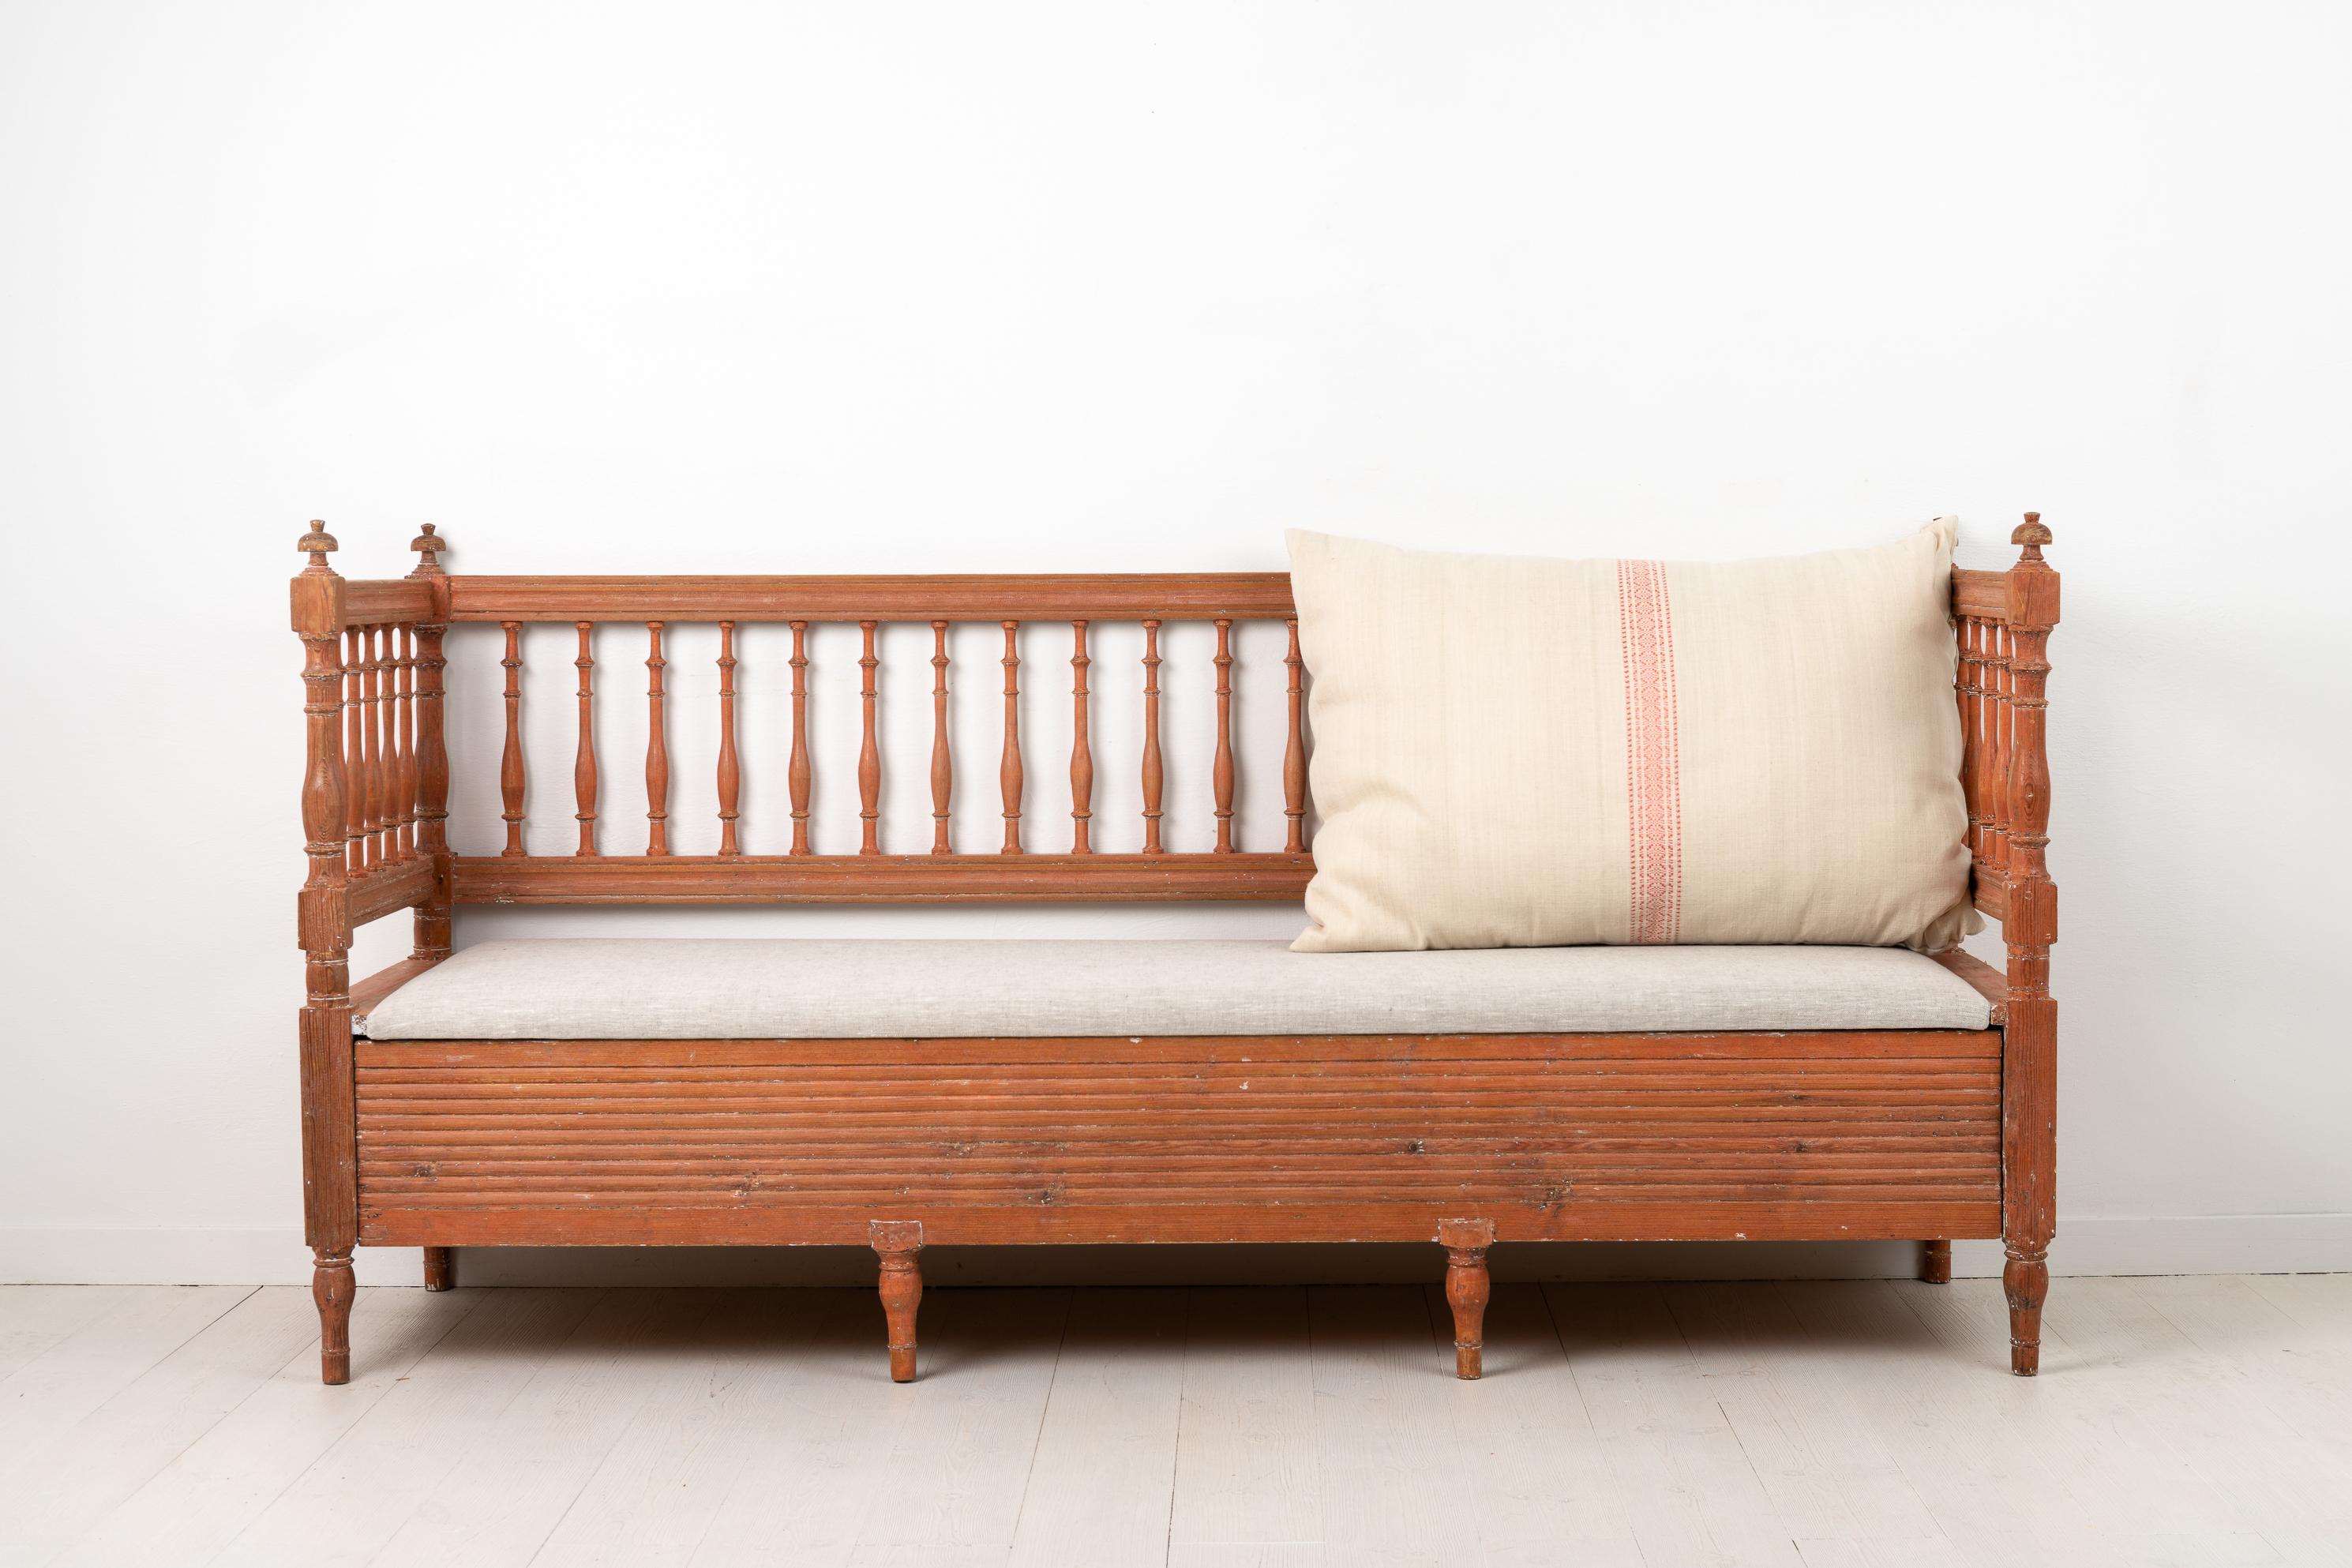 Northern Swedish Gustavian provincial sofa crafted in pine, showcasing its original scraped paint. This sofa, dating back to the early 19th century, around 1800 to 1810, exemplifies the practicality of Swedish compact living during the 18th and 19th